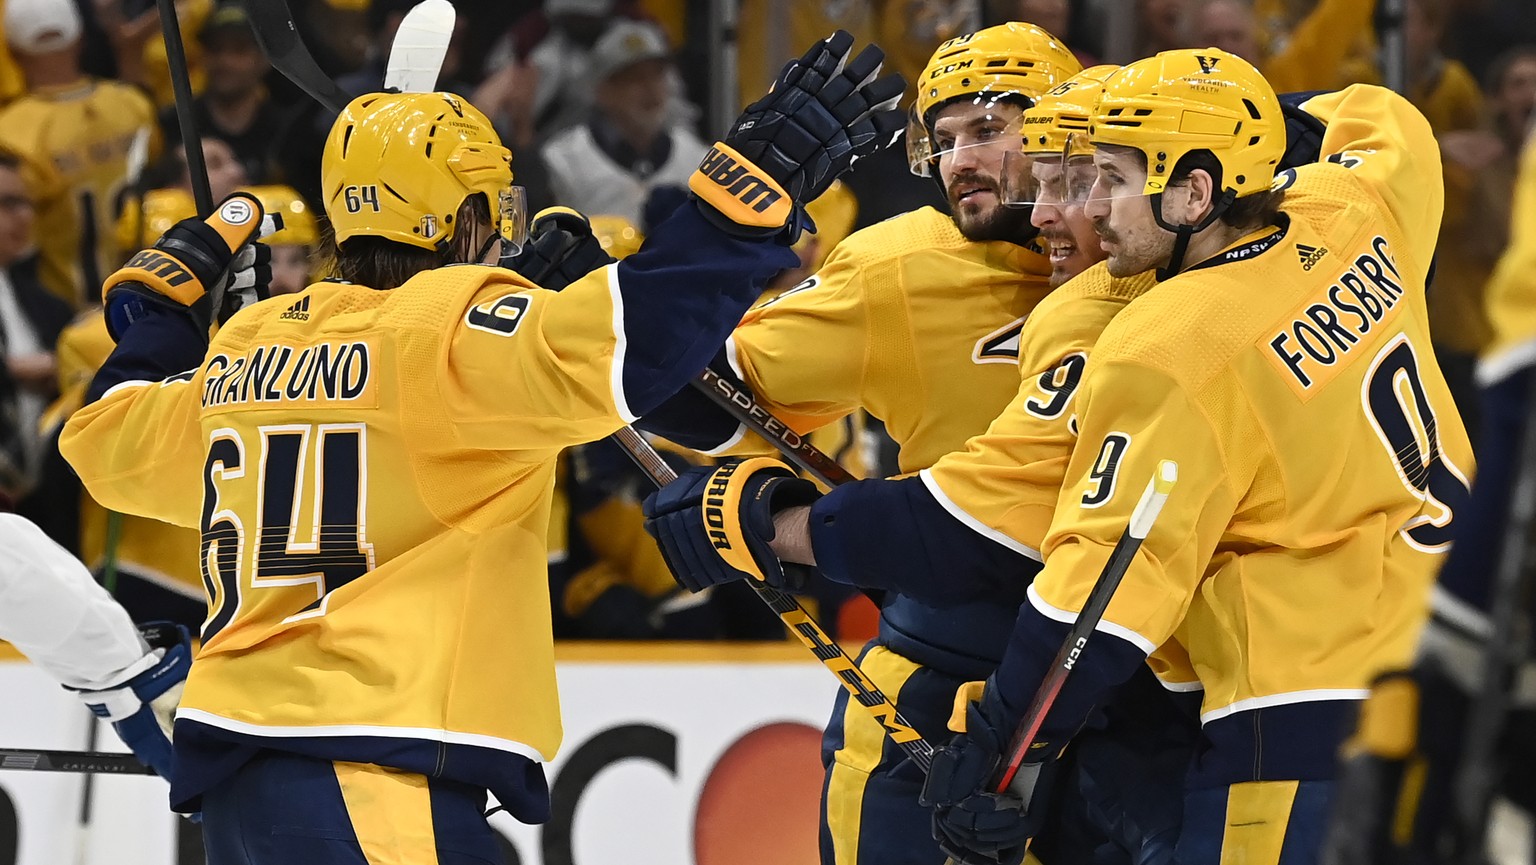 Nashville Predators defenseman Roman Josi, second from left, celebrates with teammates after scoring a goal against the Colorado Avalanche during the second period in Game 3 of an NHL hockey Stanley C ...